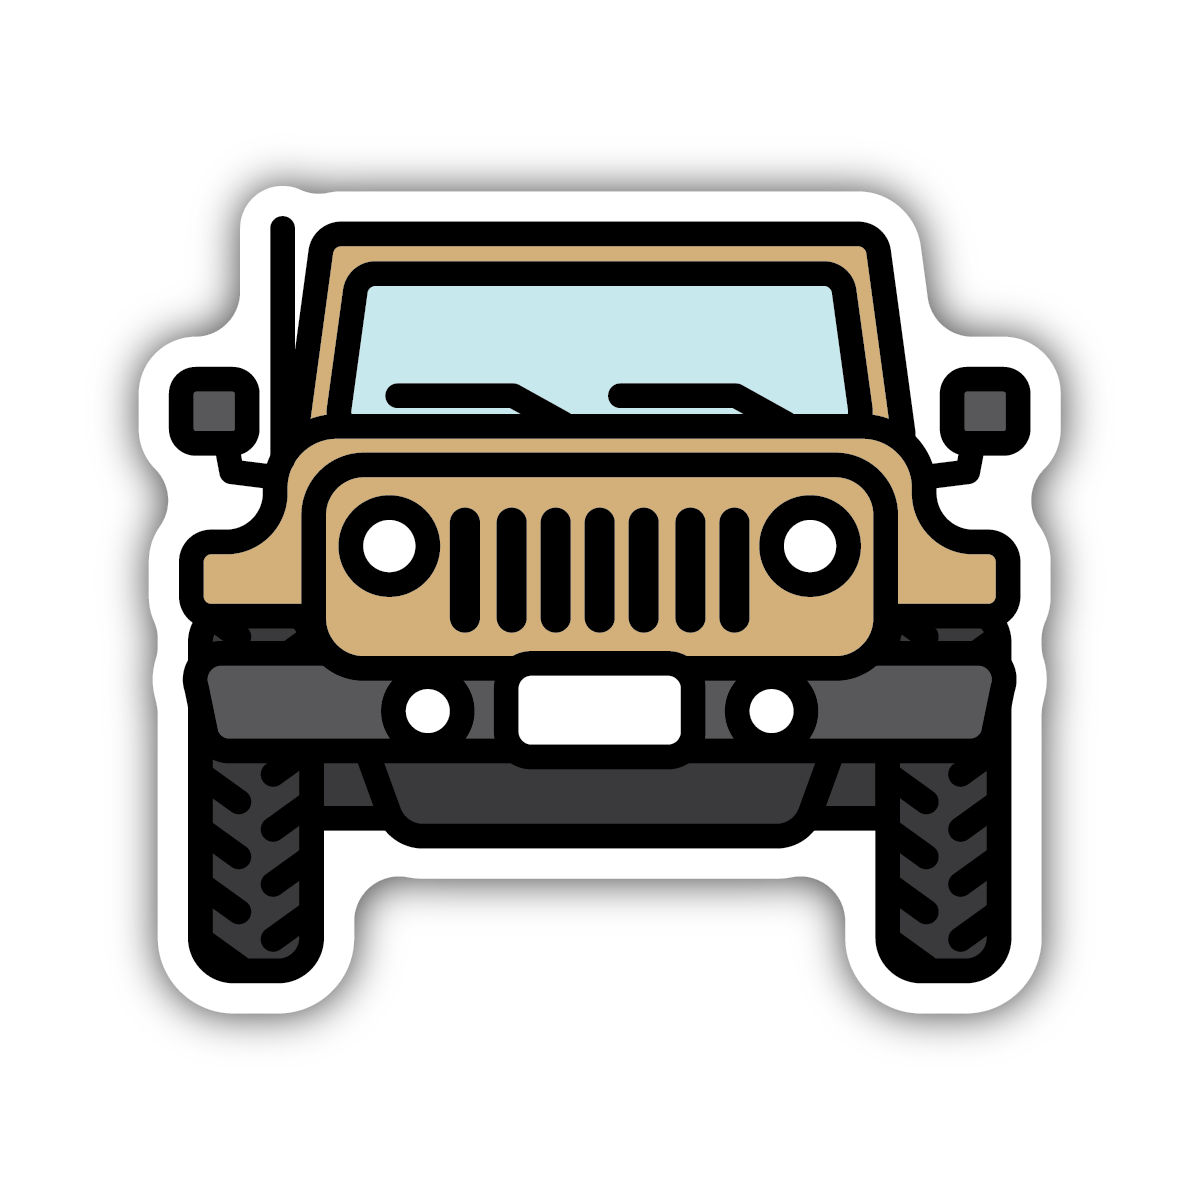 sticker on white background. sticker has graphic of the front of a beige jeep.